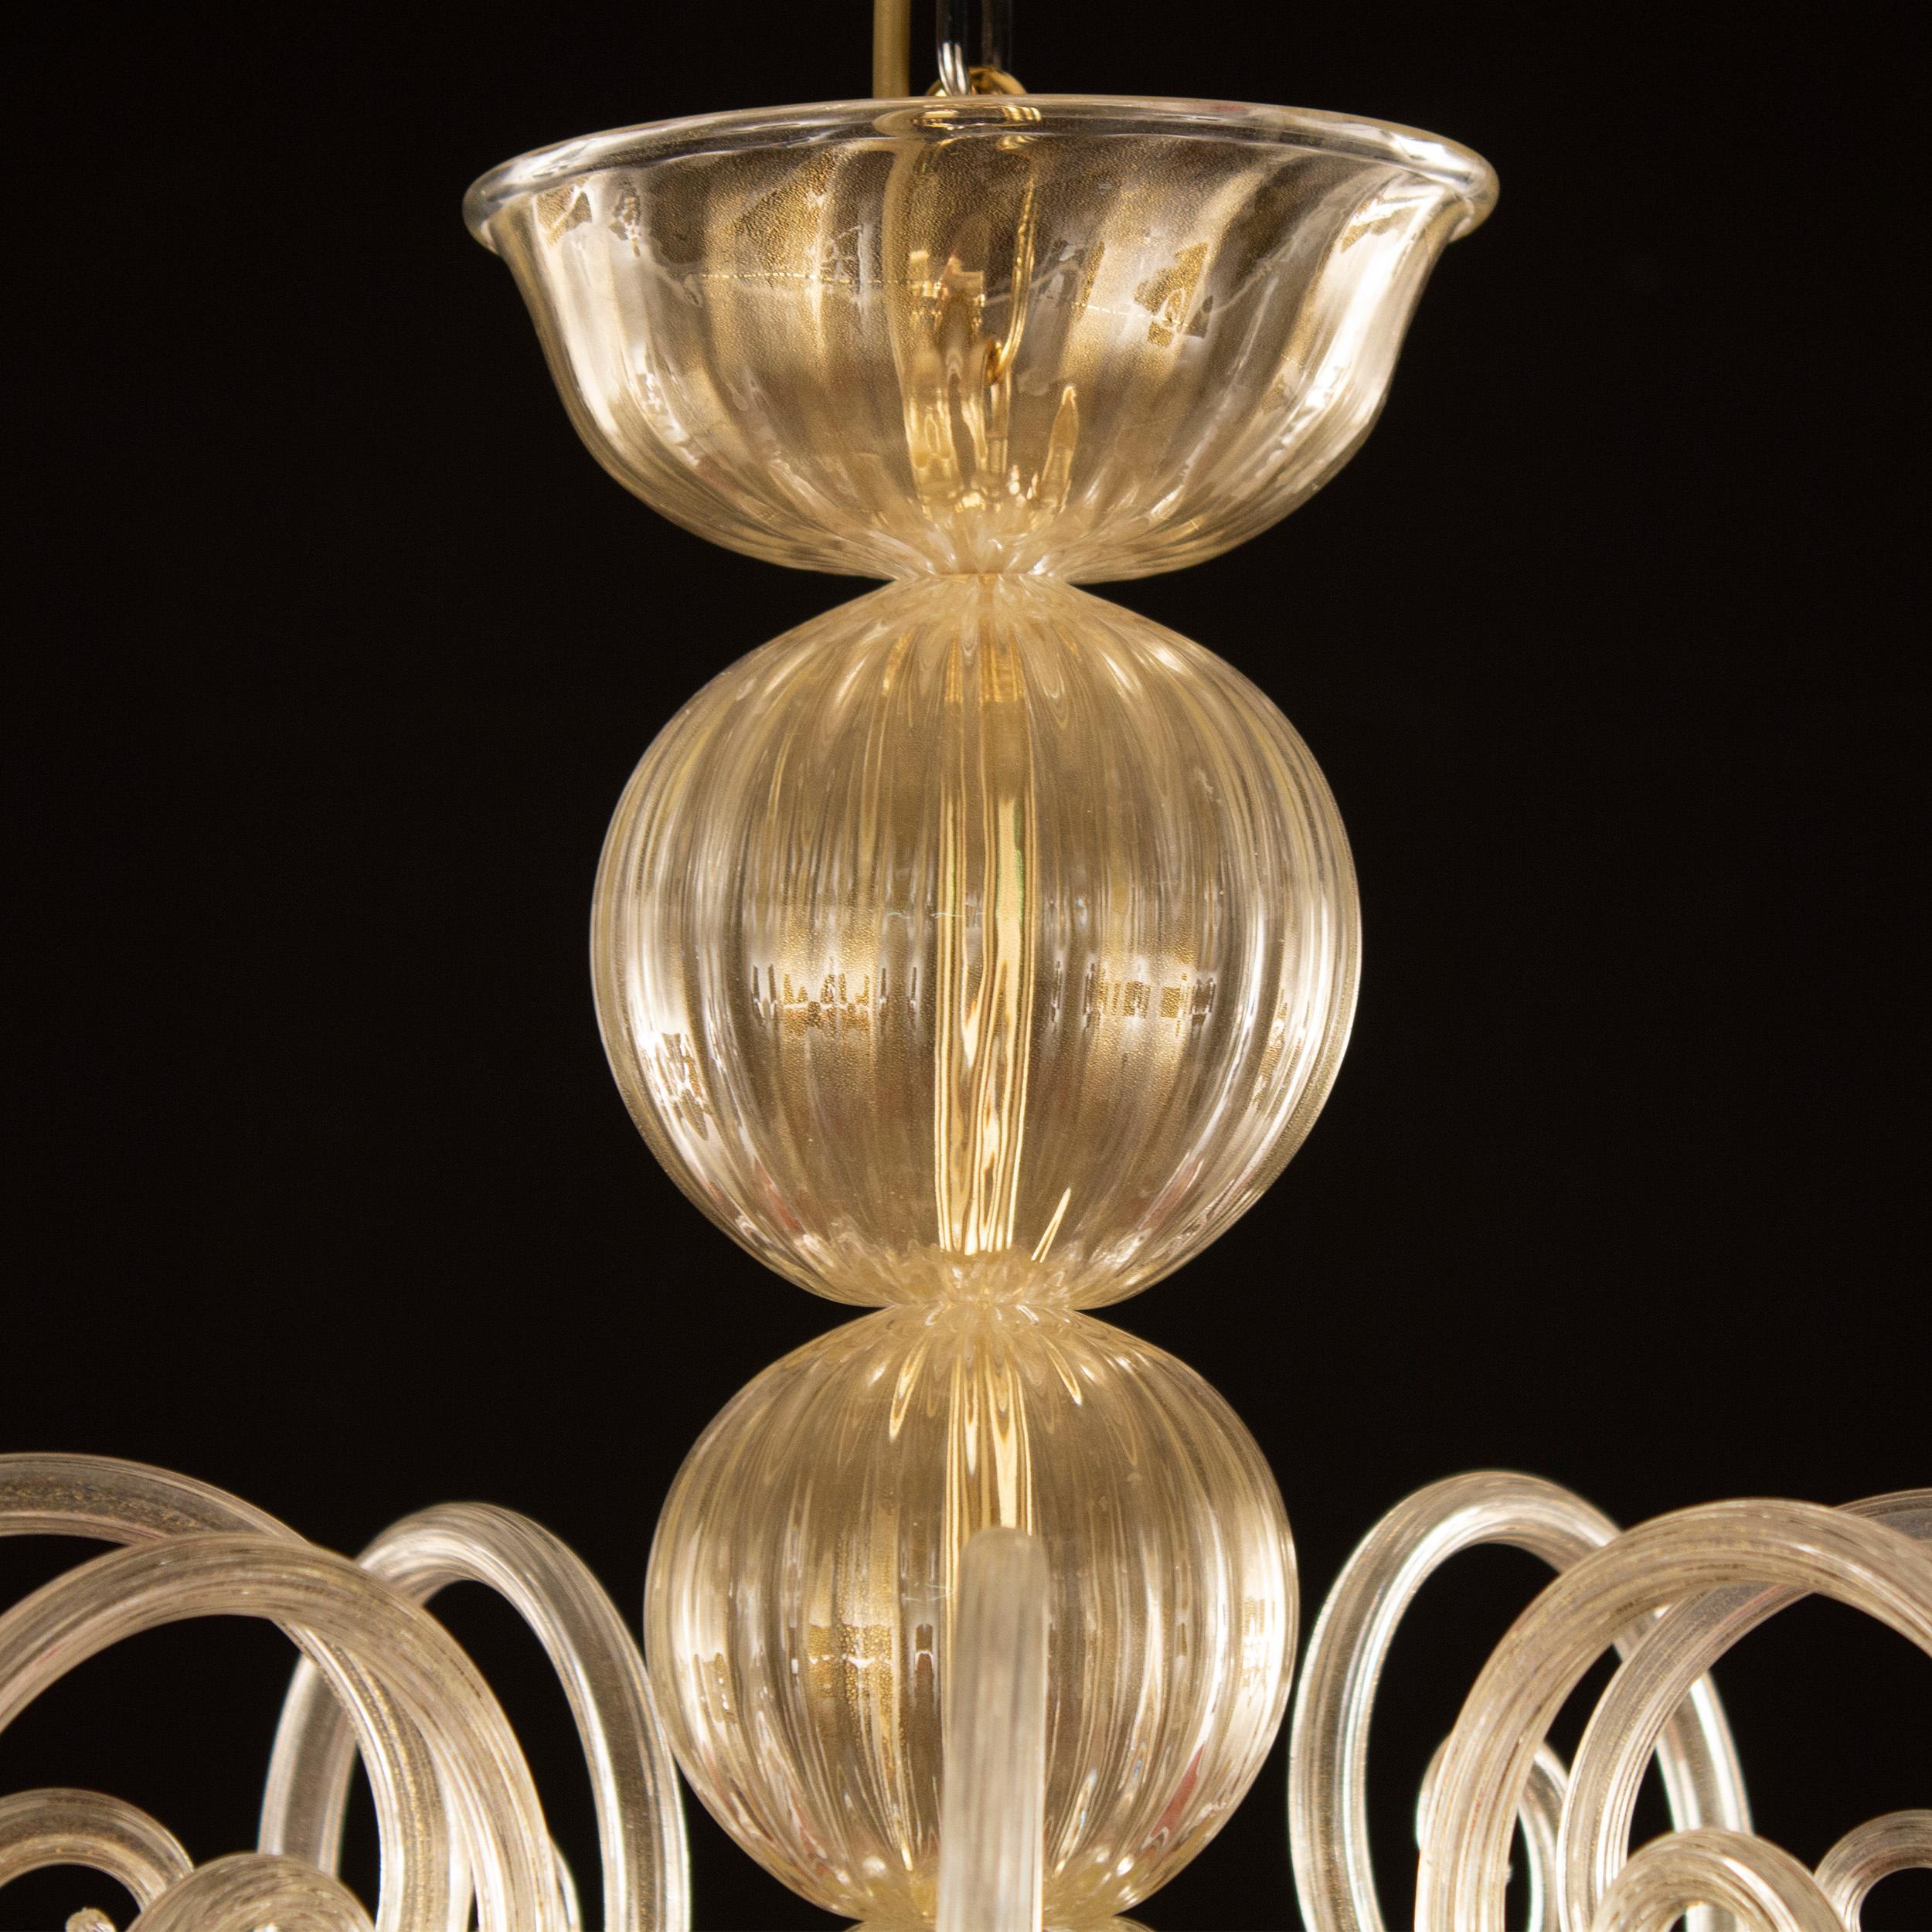 Artistic Chandelier 8 Arms Golden Leaf Murano Glass and Lampshades by Multiforme For Sale 3